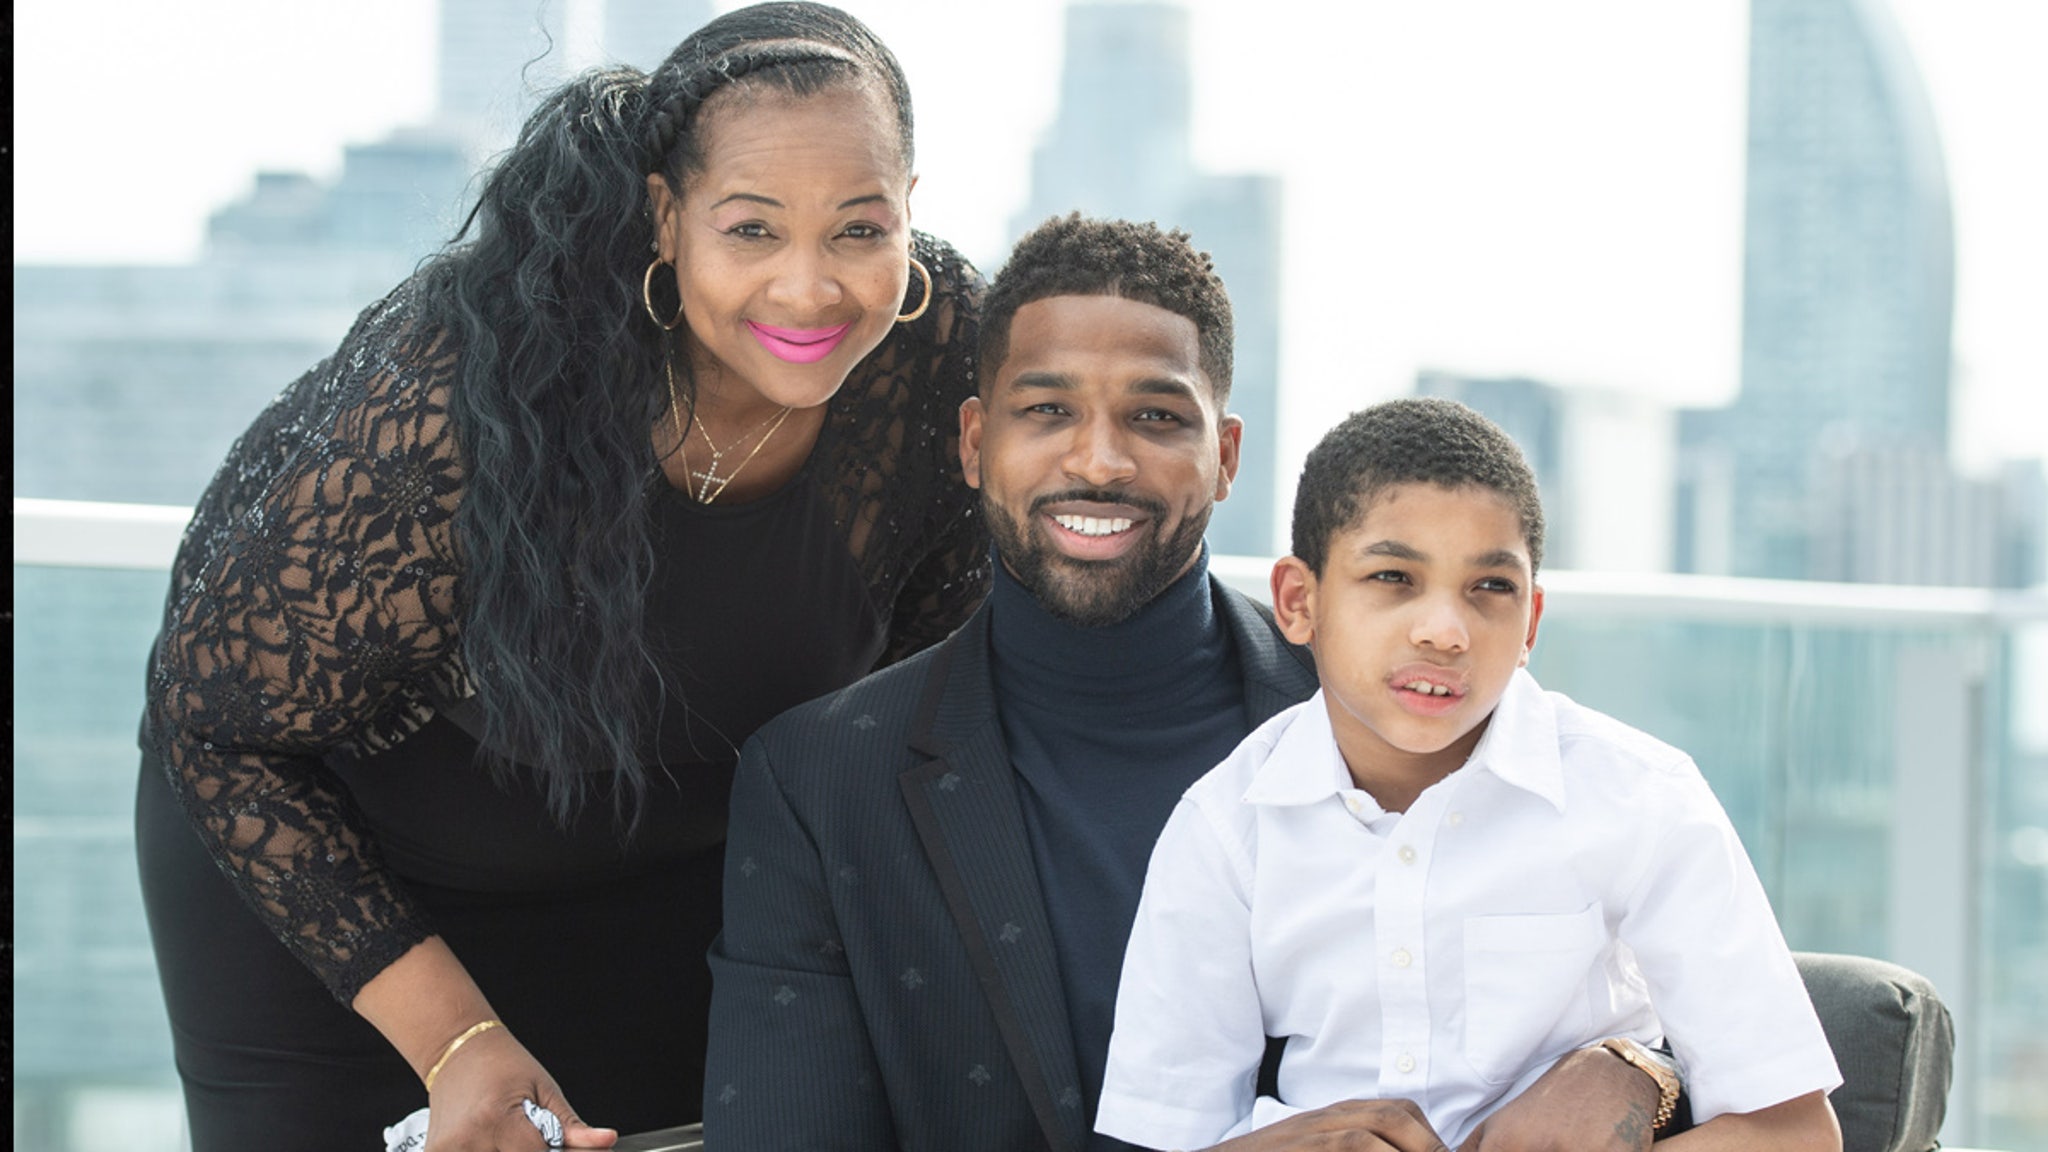 Tristan Thompson Files for Guardianship of Younger Brother After Mom’s Death